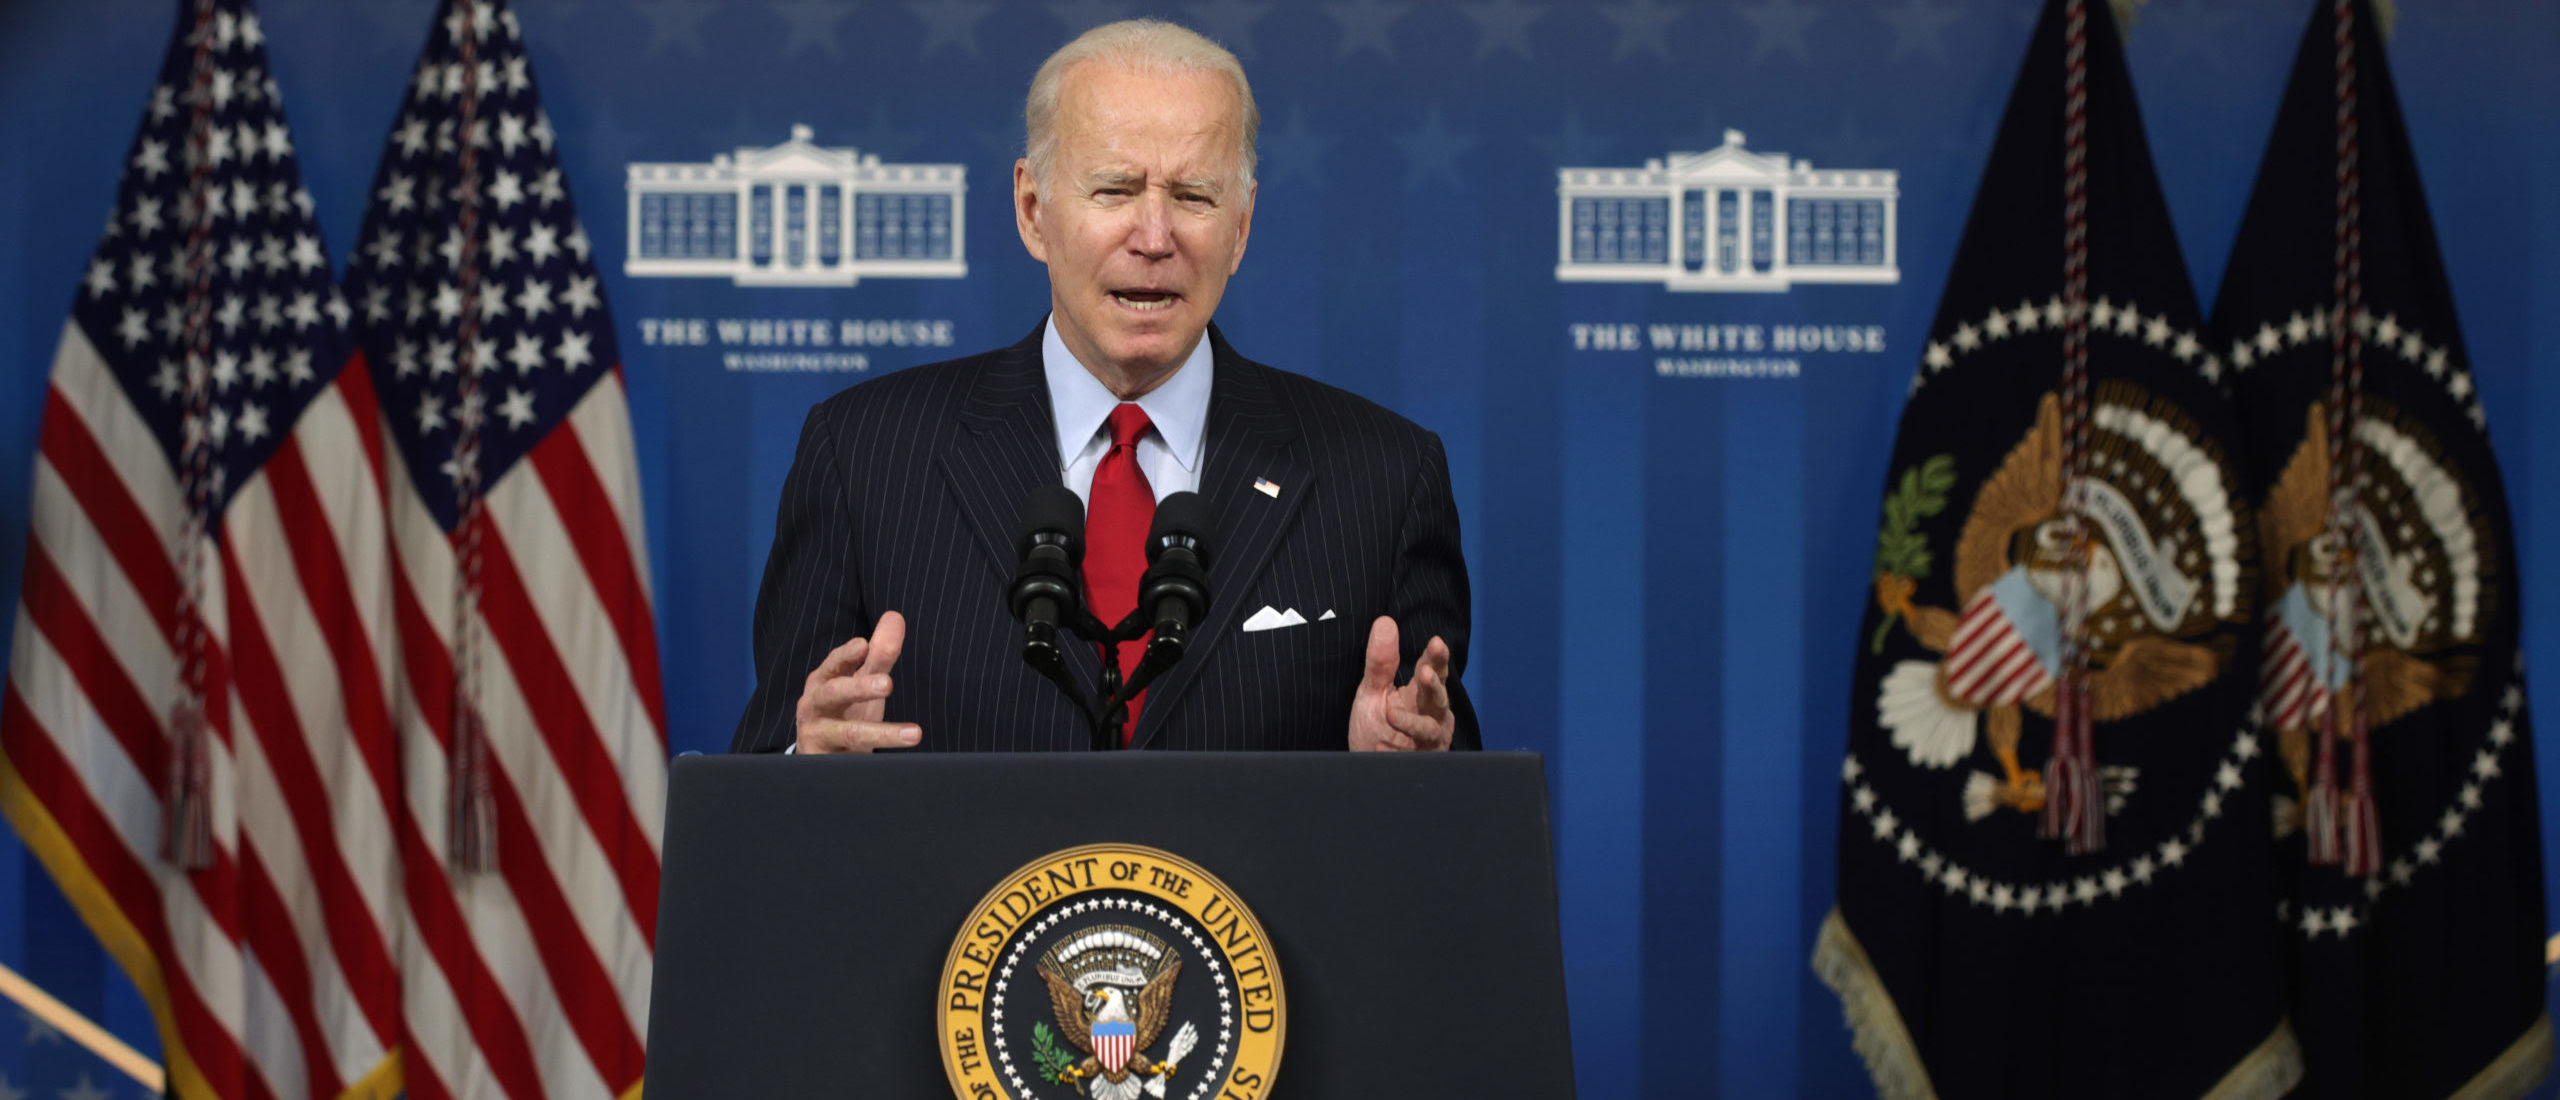 Biden Says Arbery Verdict ‘Not Enough’ To Ensure Equal Justice